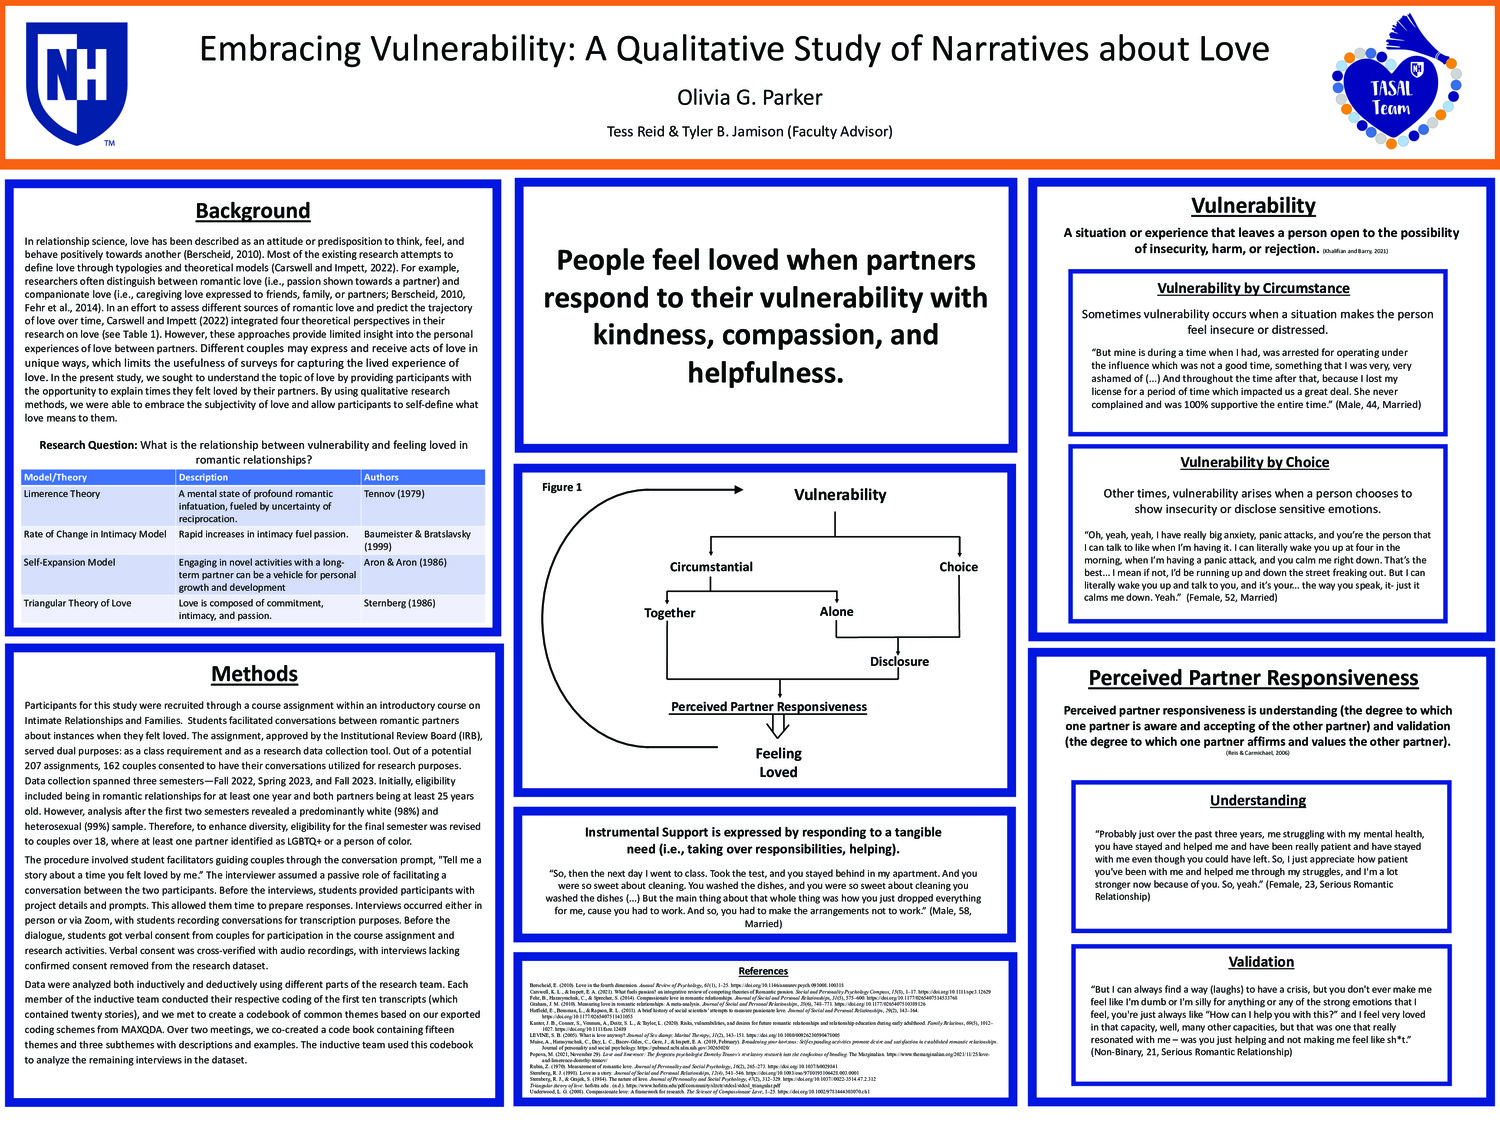 Embracing Vulnerability: A Qualitative Study Of Narratives About Love by tbj1000